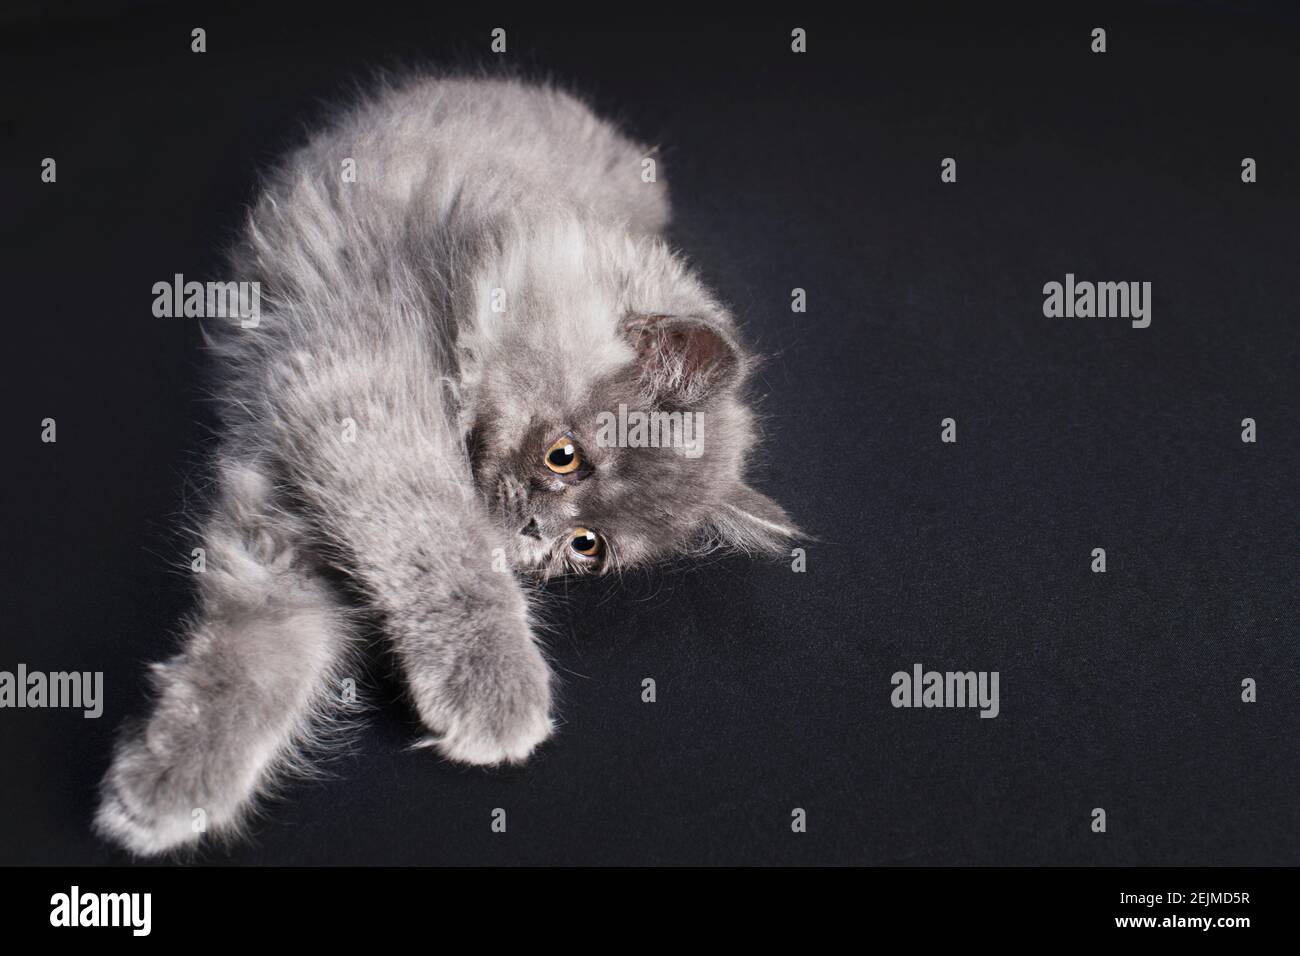 Sweet looking long haired grey cat lying on his side, with paws stretched towards the camera. Stock Photo